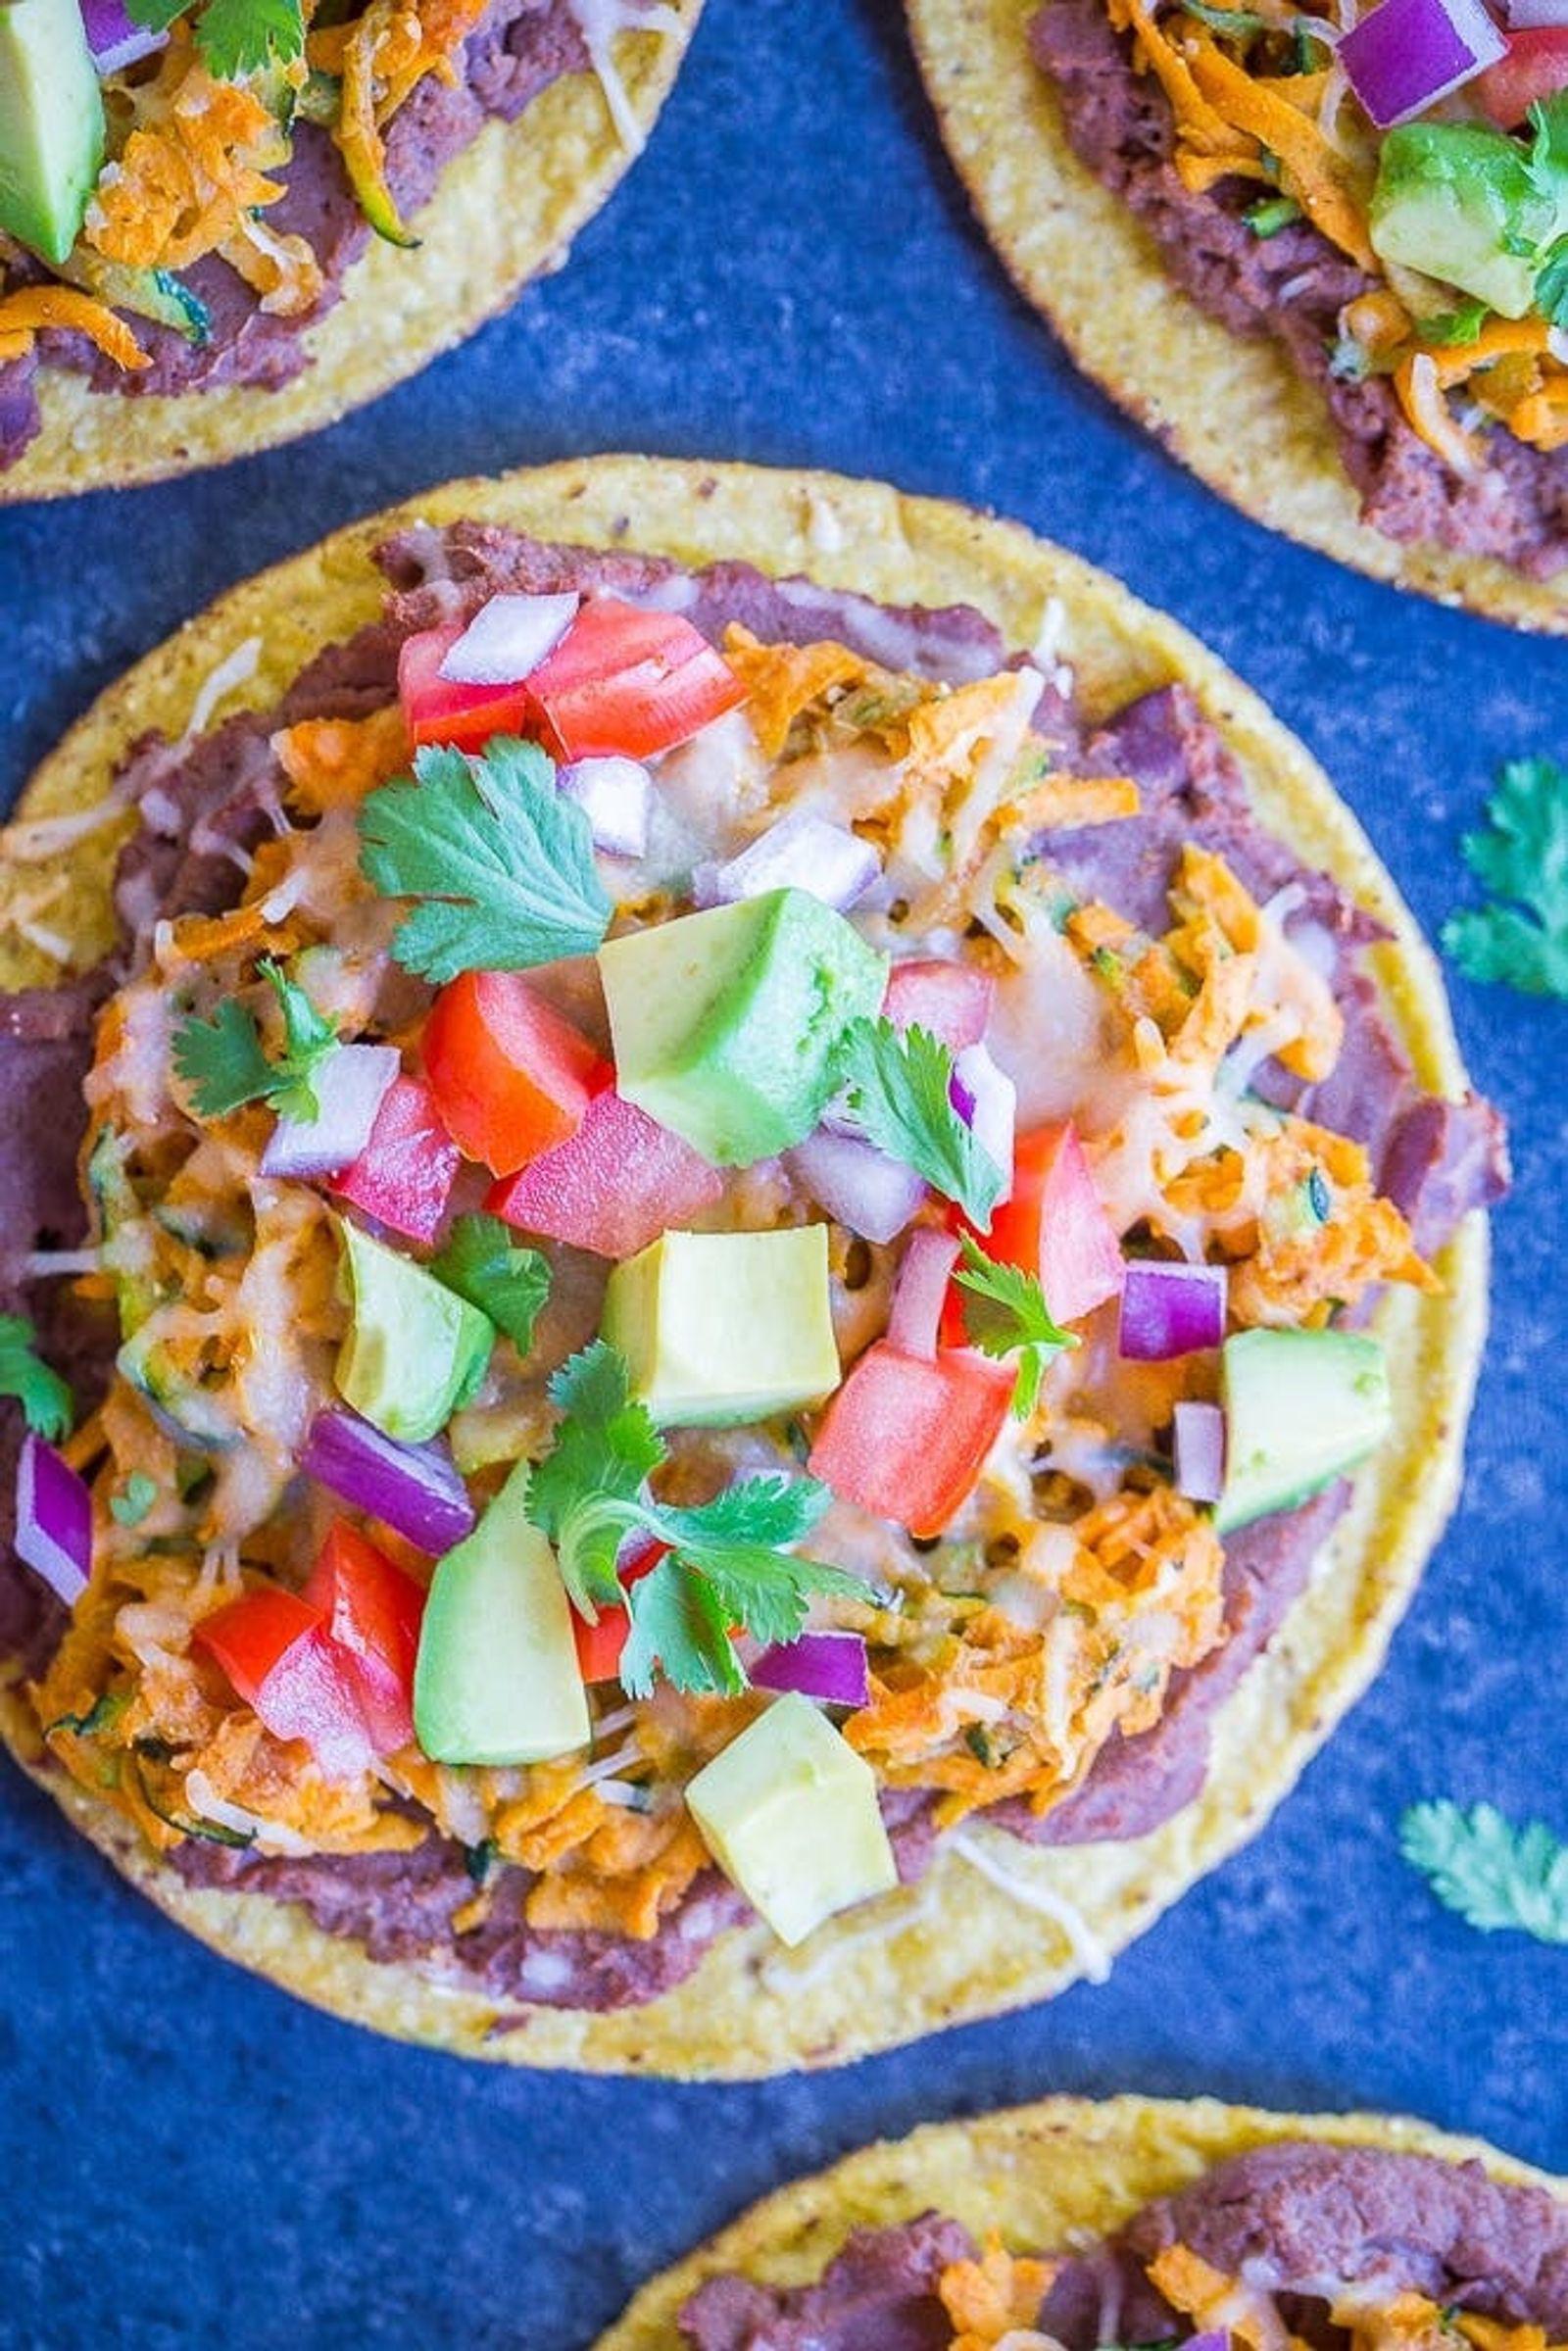 Make this mouthwatering lunch extra easily with store-bought tostadas, which you spread with refried beans (or black beans) and your choice of taco toppings, such as shredded sweet potato and grated cheese. (via <strong><a href="https://www.shelikesfood.com/sweet-potato-zucchini-tostadas/">She Likes Food</a></strong>)